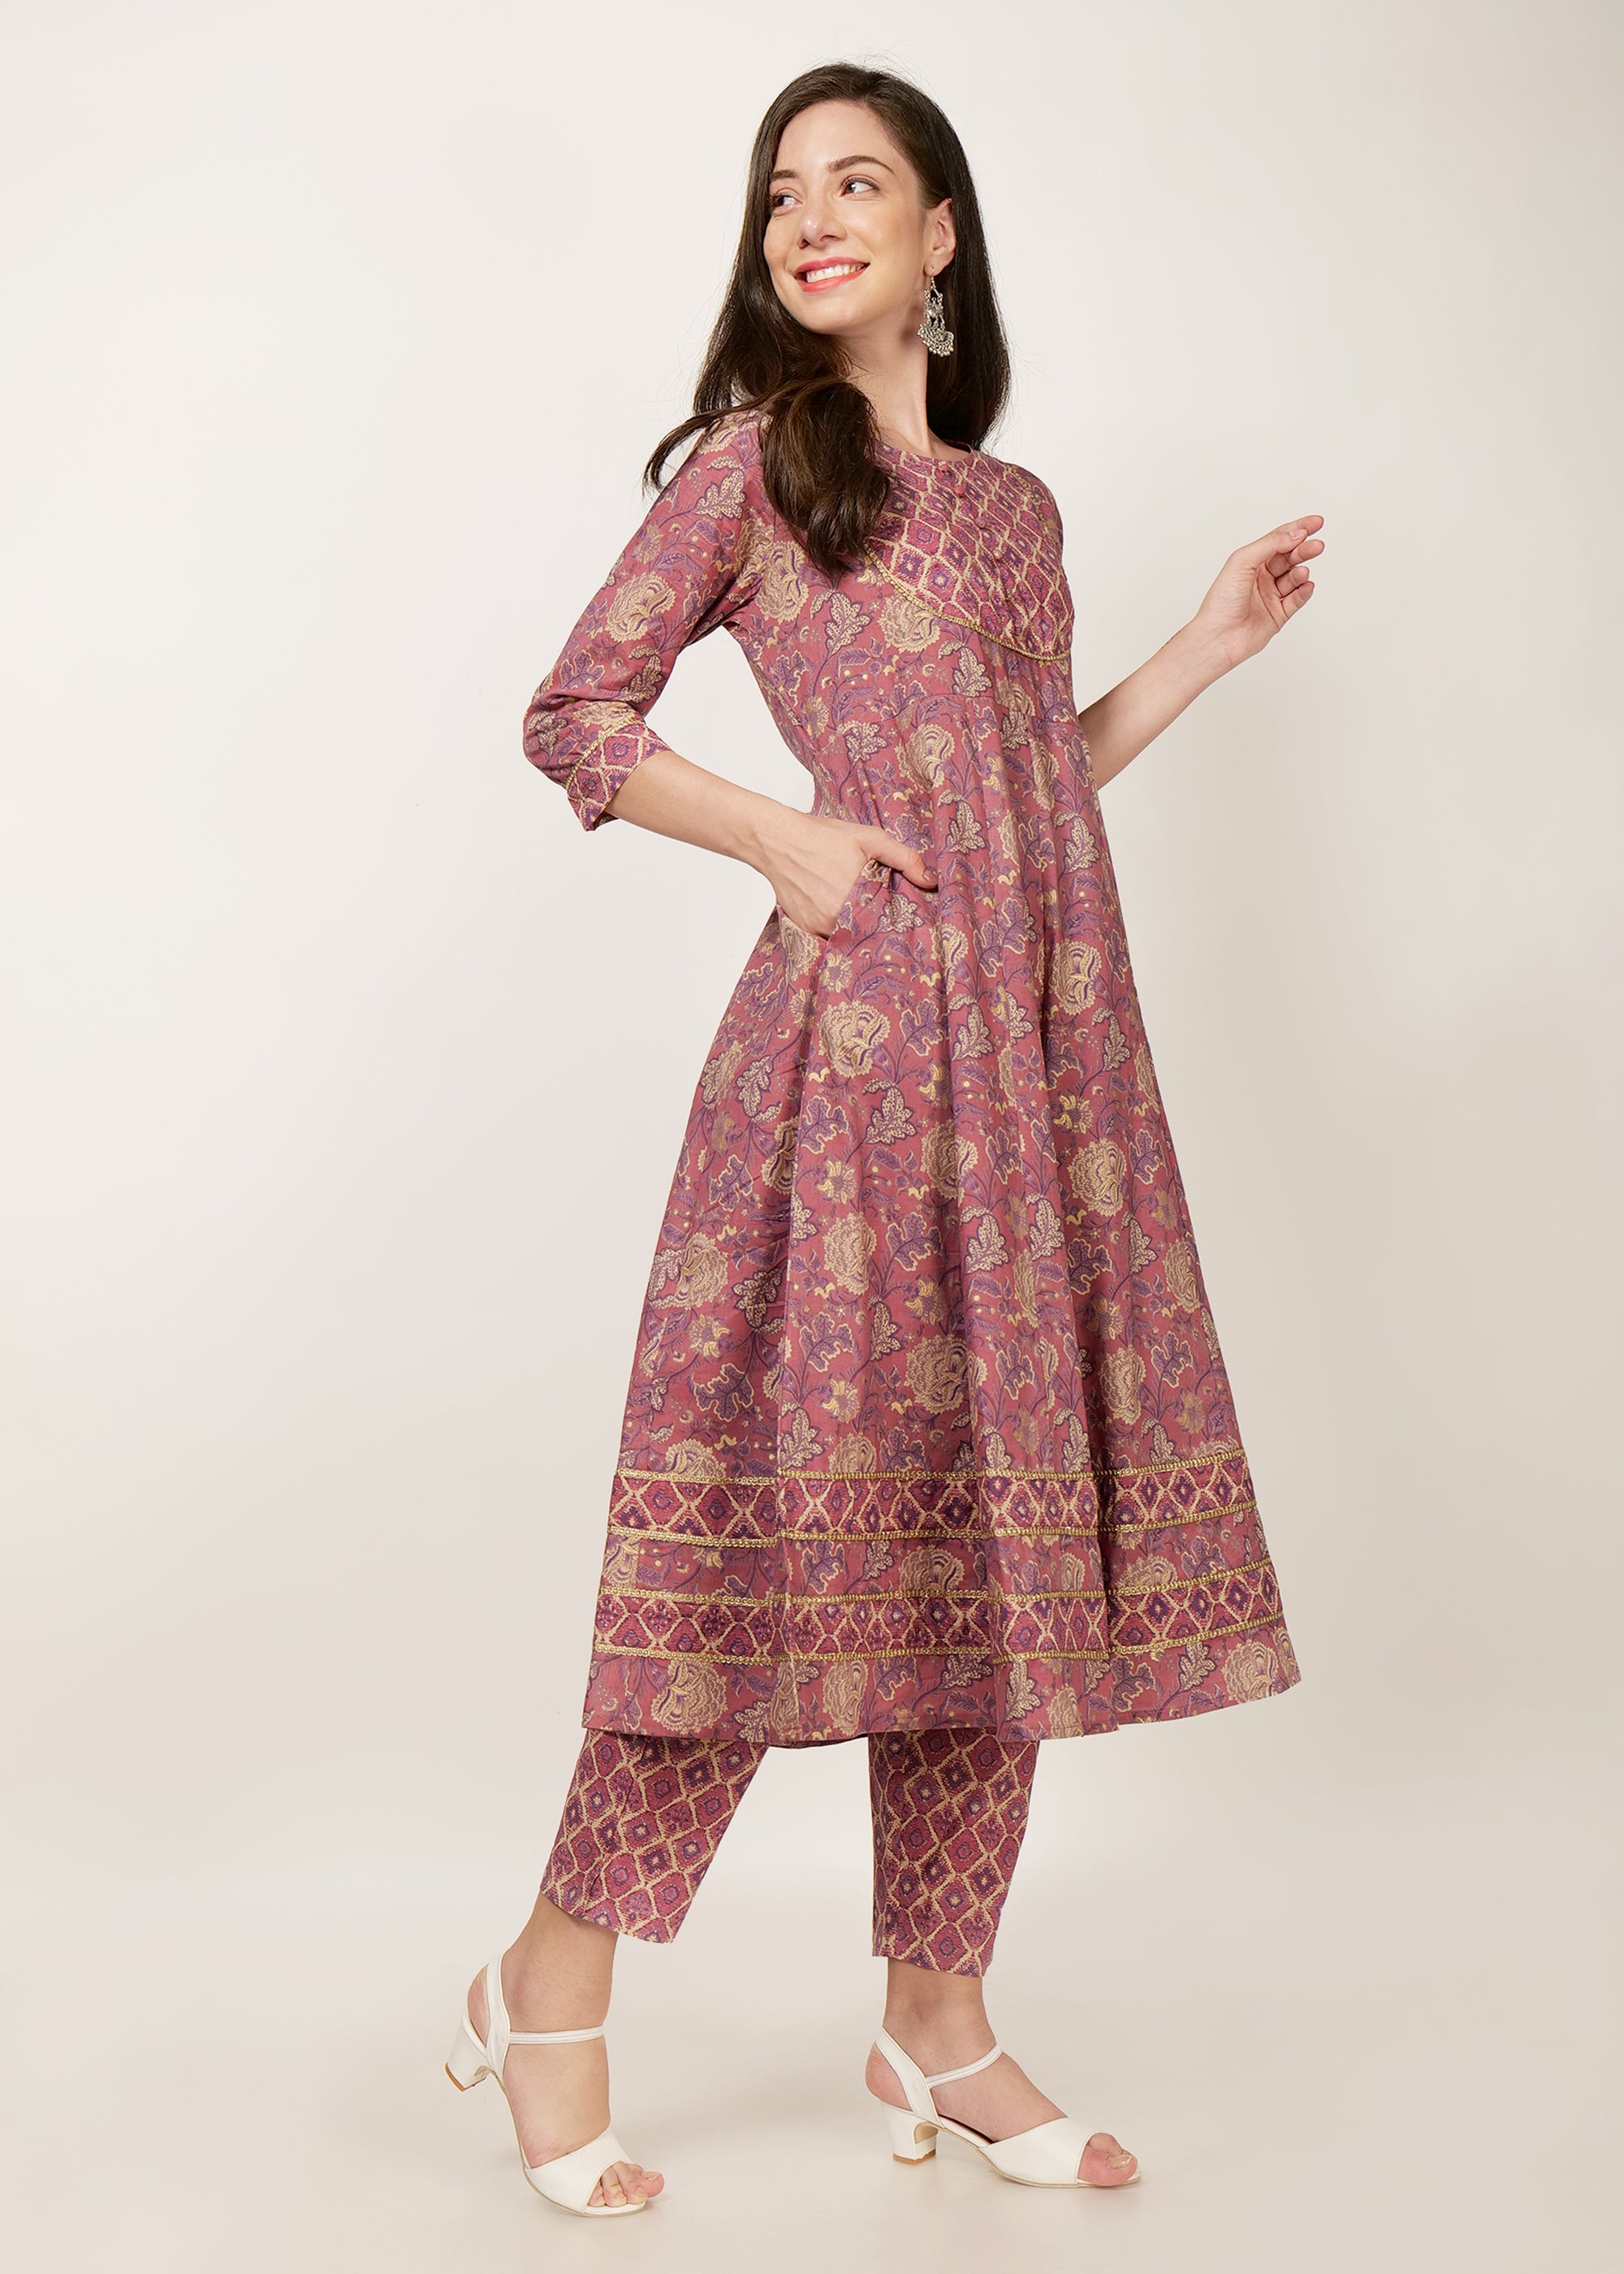 Five Star Printed Lawn Unstitched 3 Piece Suit FS19-L3 1010A - Spring /  Summer Collection | Casual dresses, Girls casual dresses, Pakistani party  wear dresses